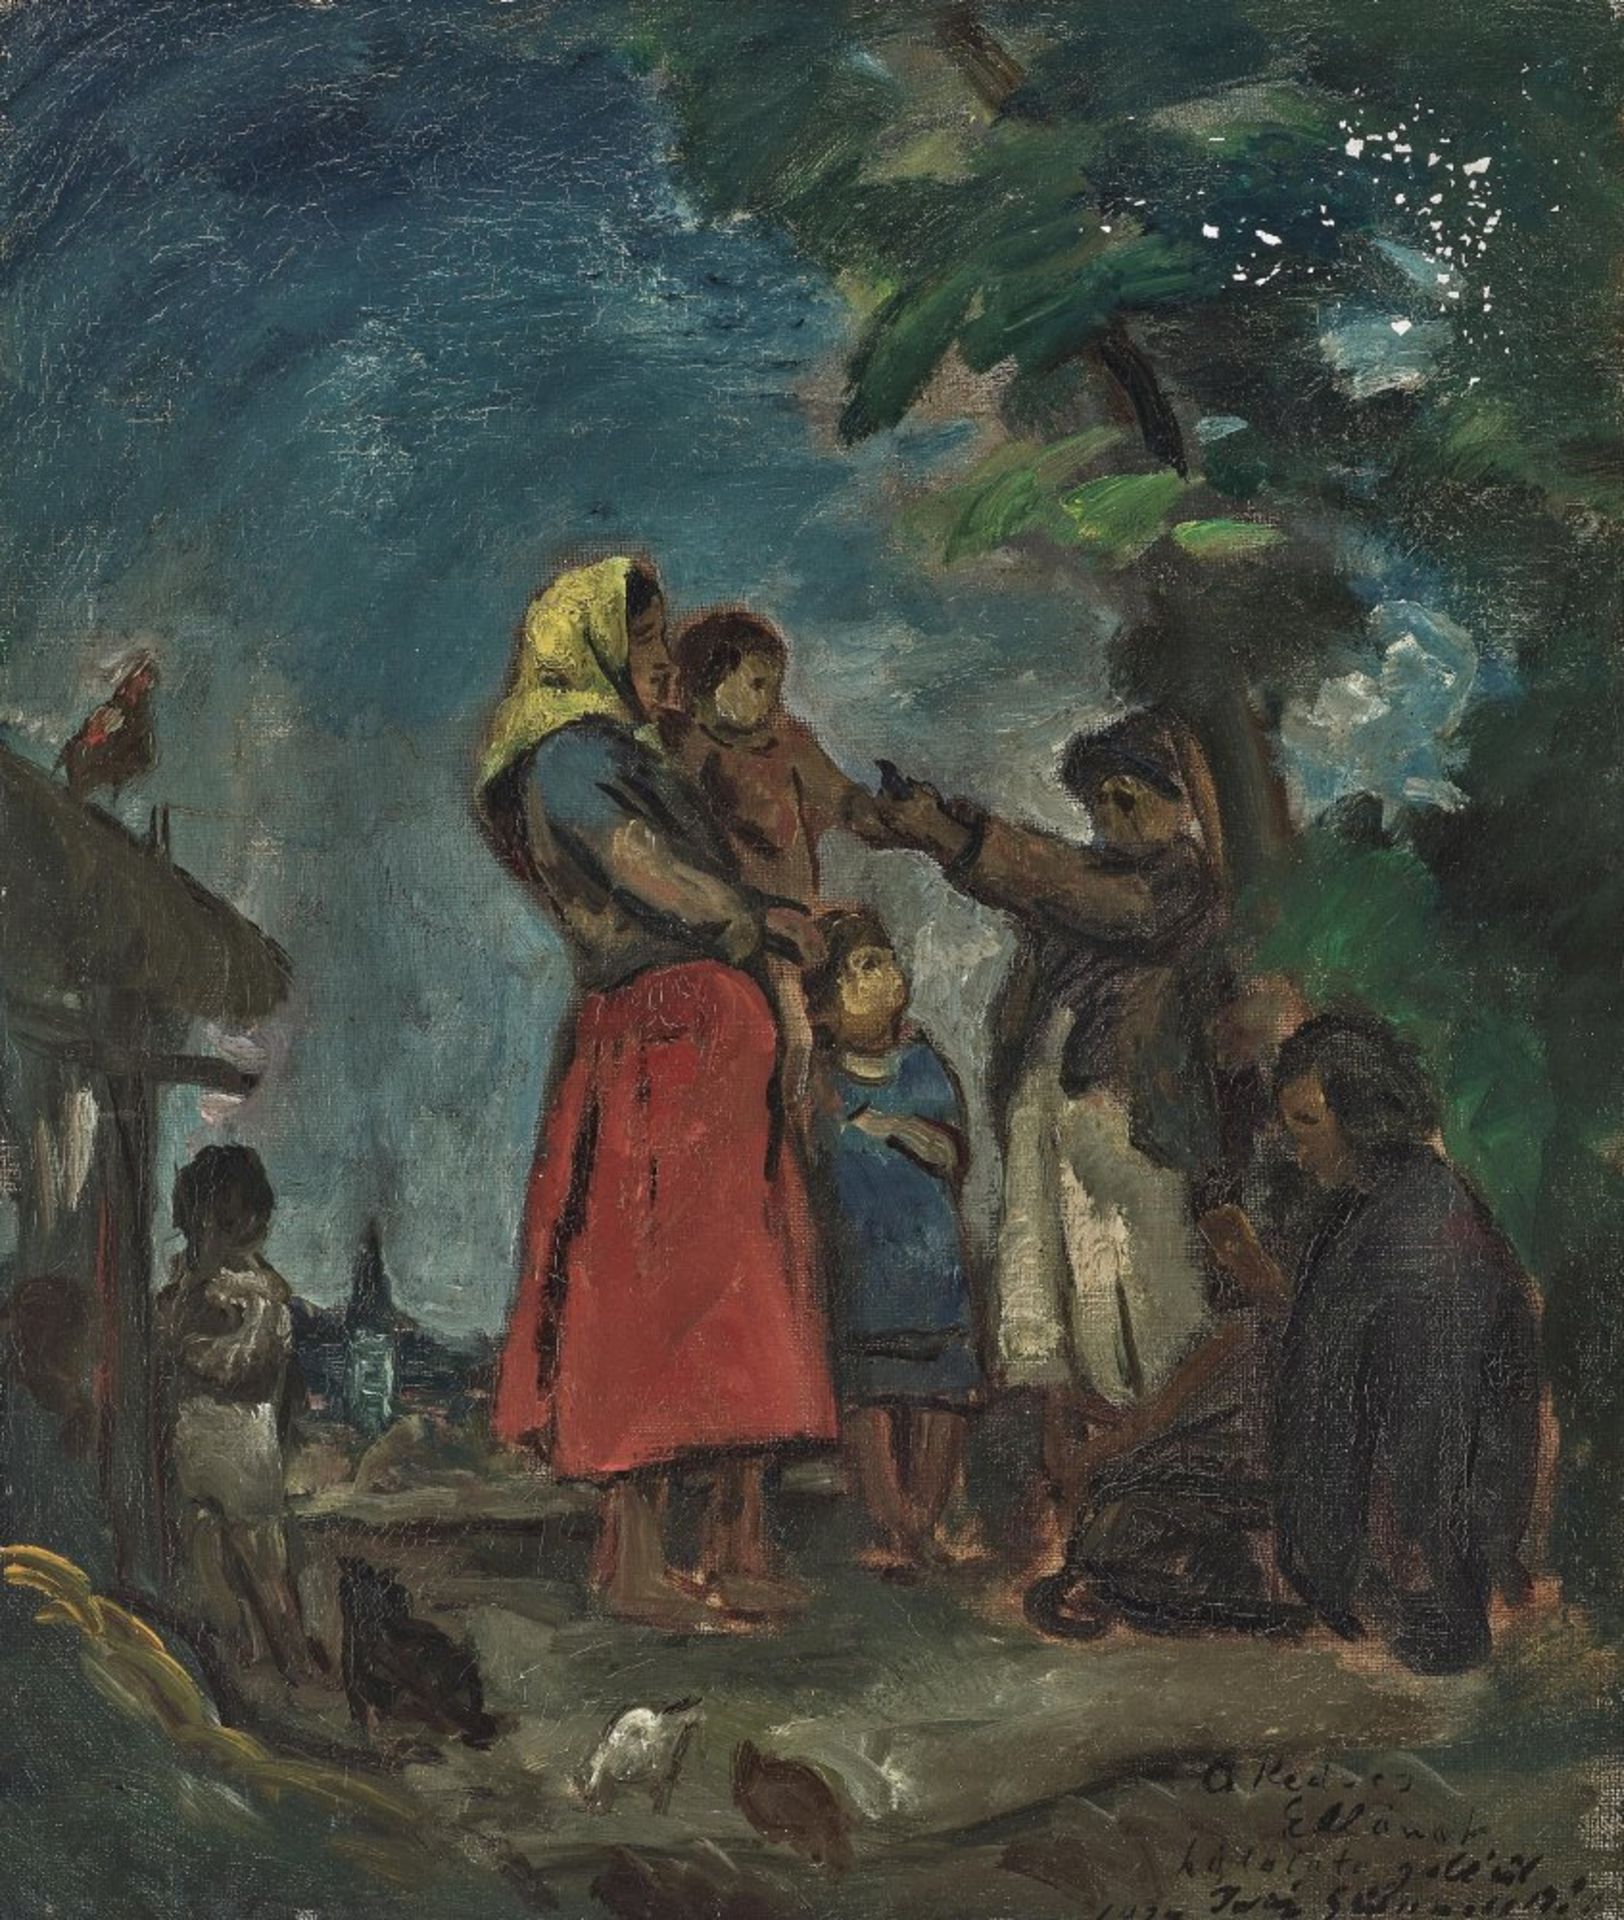 Peasant woman with children in conversation - Image 2 of 4